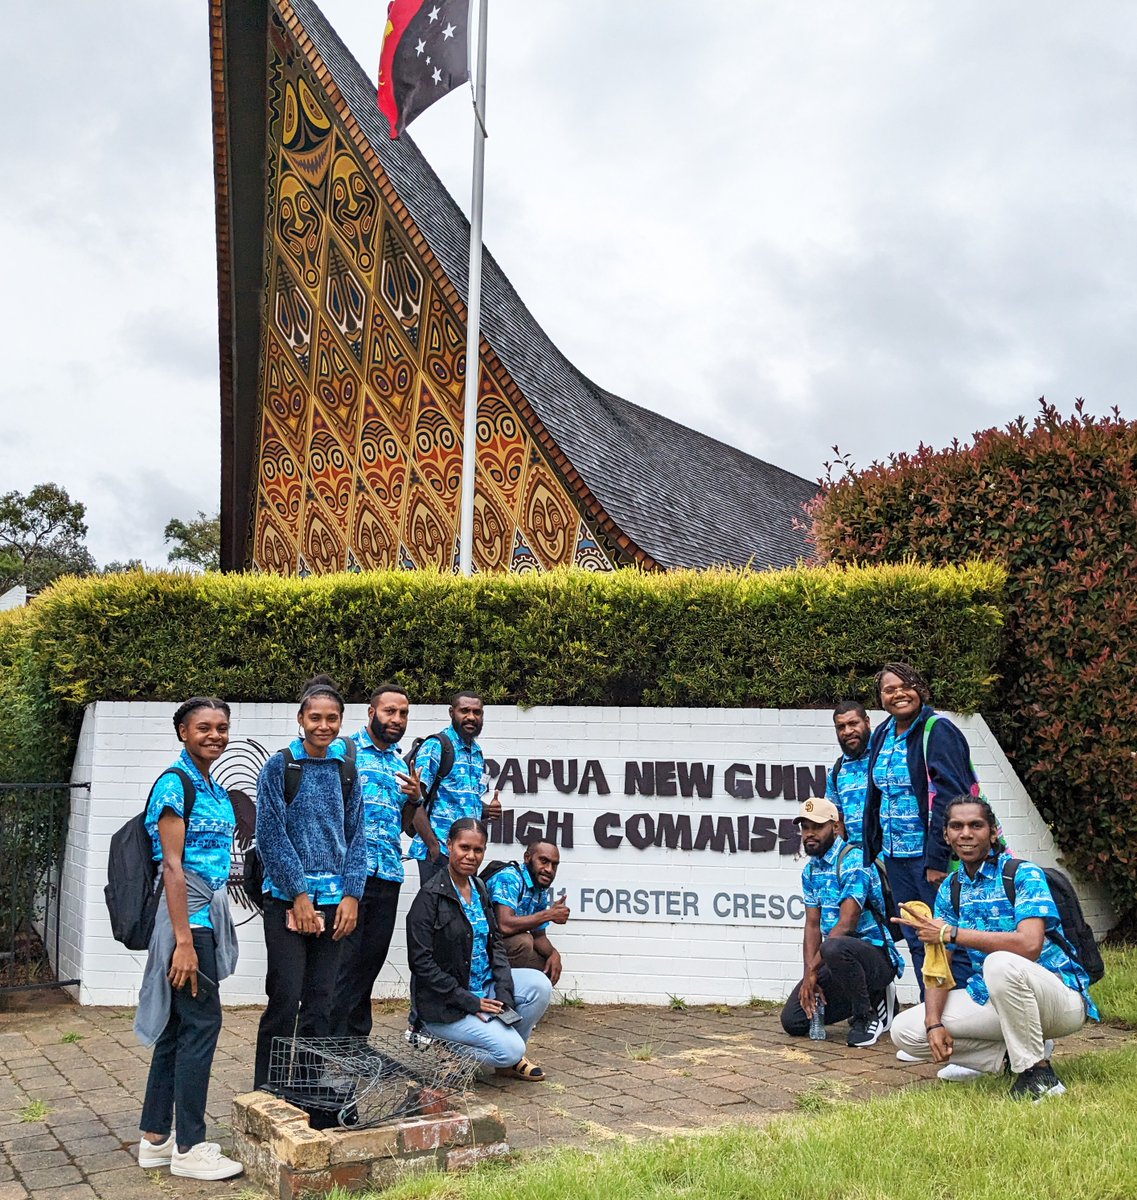 We are pleased to welcome ten of UPNG's best economics and public policy students to Canberra & @ANUCrawford for the @devpolicy ANU-UPNG Summer School. @OurANU